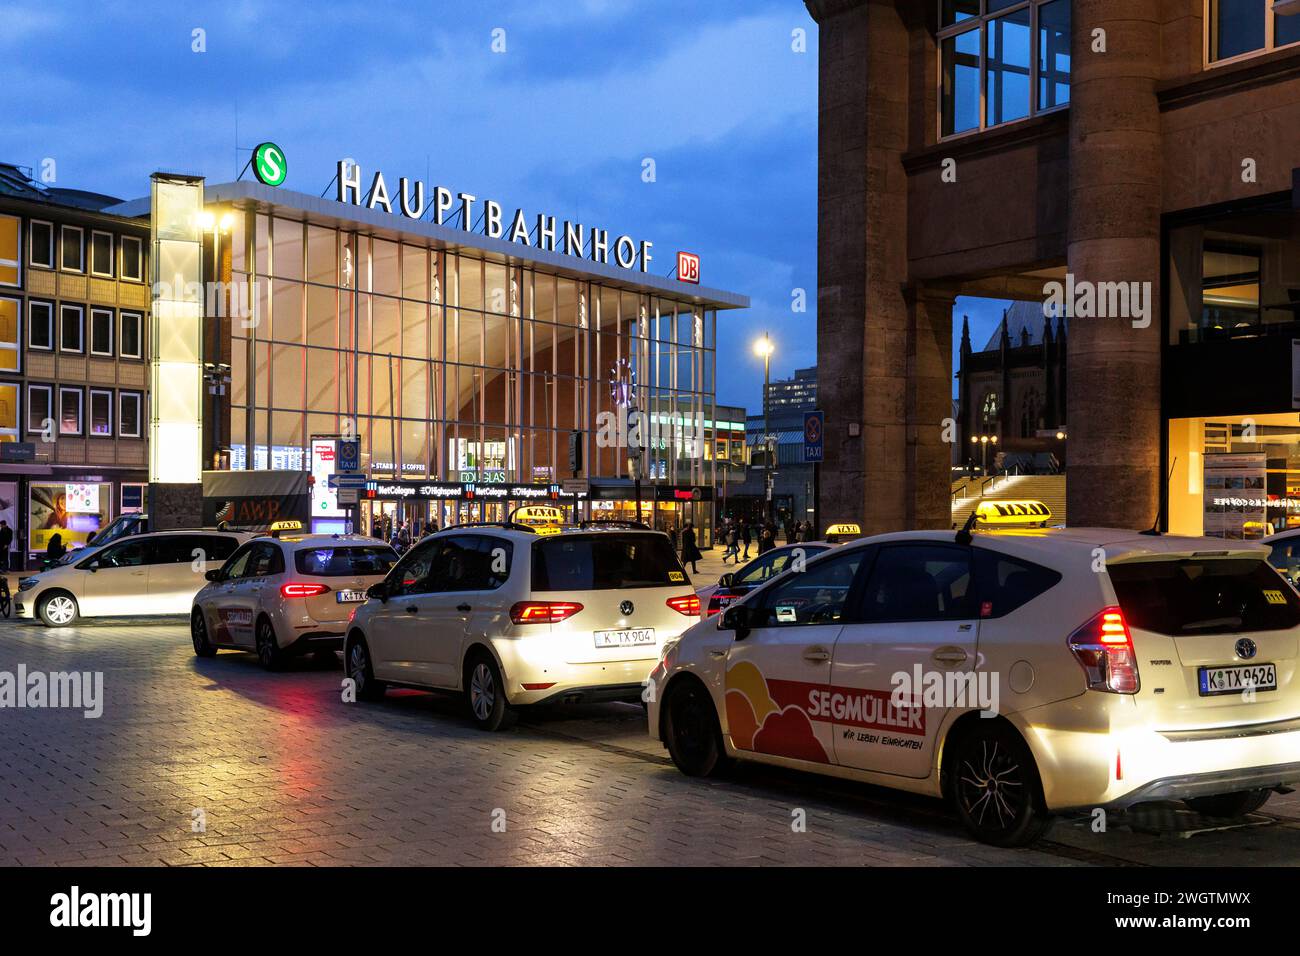 taxi cabs stands at the square in front of the central station, Cologne, Germany. Taxis am Bahnhofsvorplatz, Hauptbahnhof, Koeln, Deutschland. Stock Photo